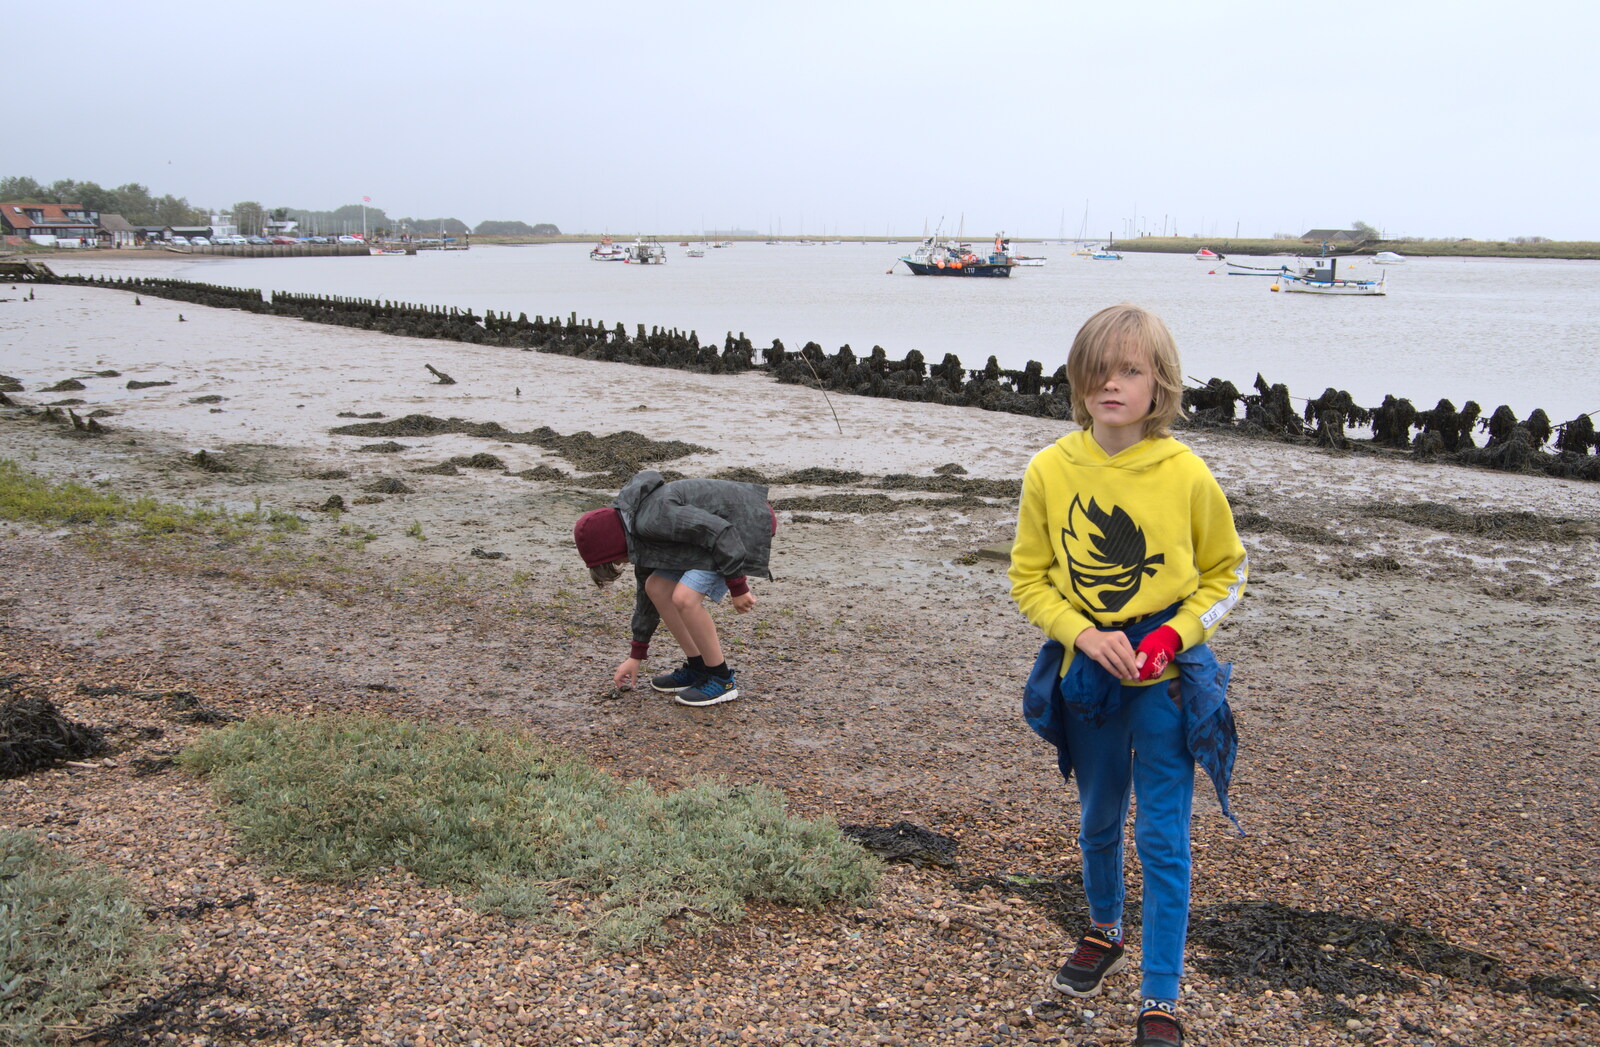 The boys roam around down by the river from A Trip to Orford, Suffolk - 29th August 2020